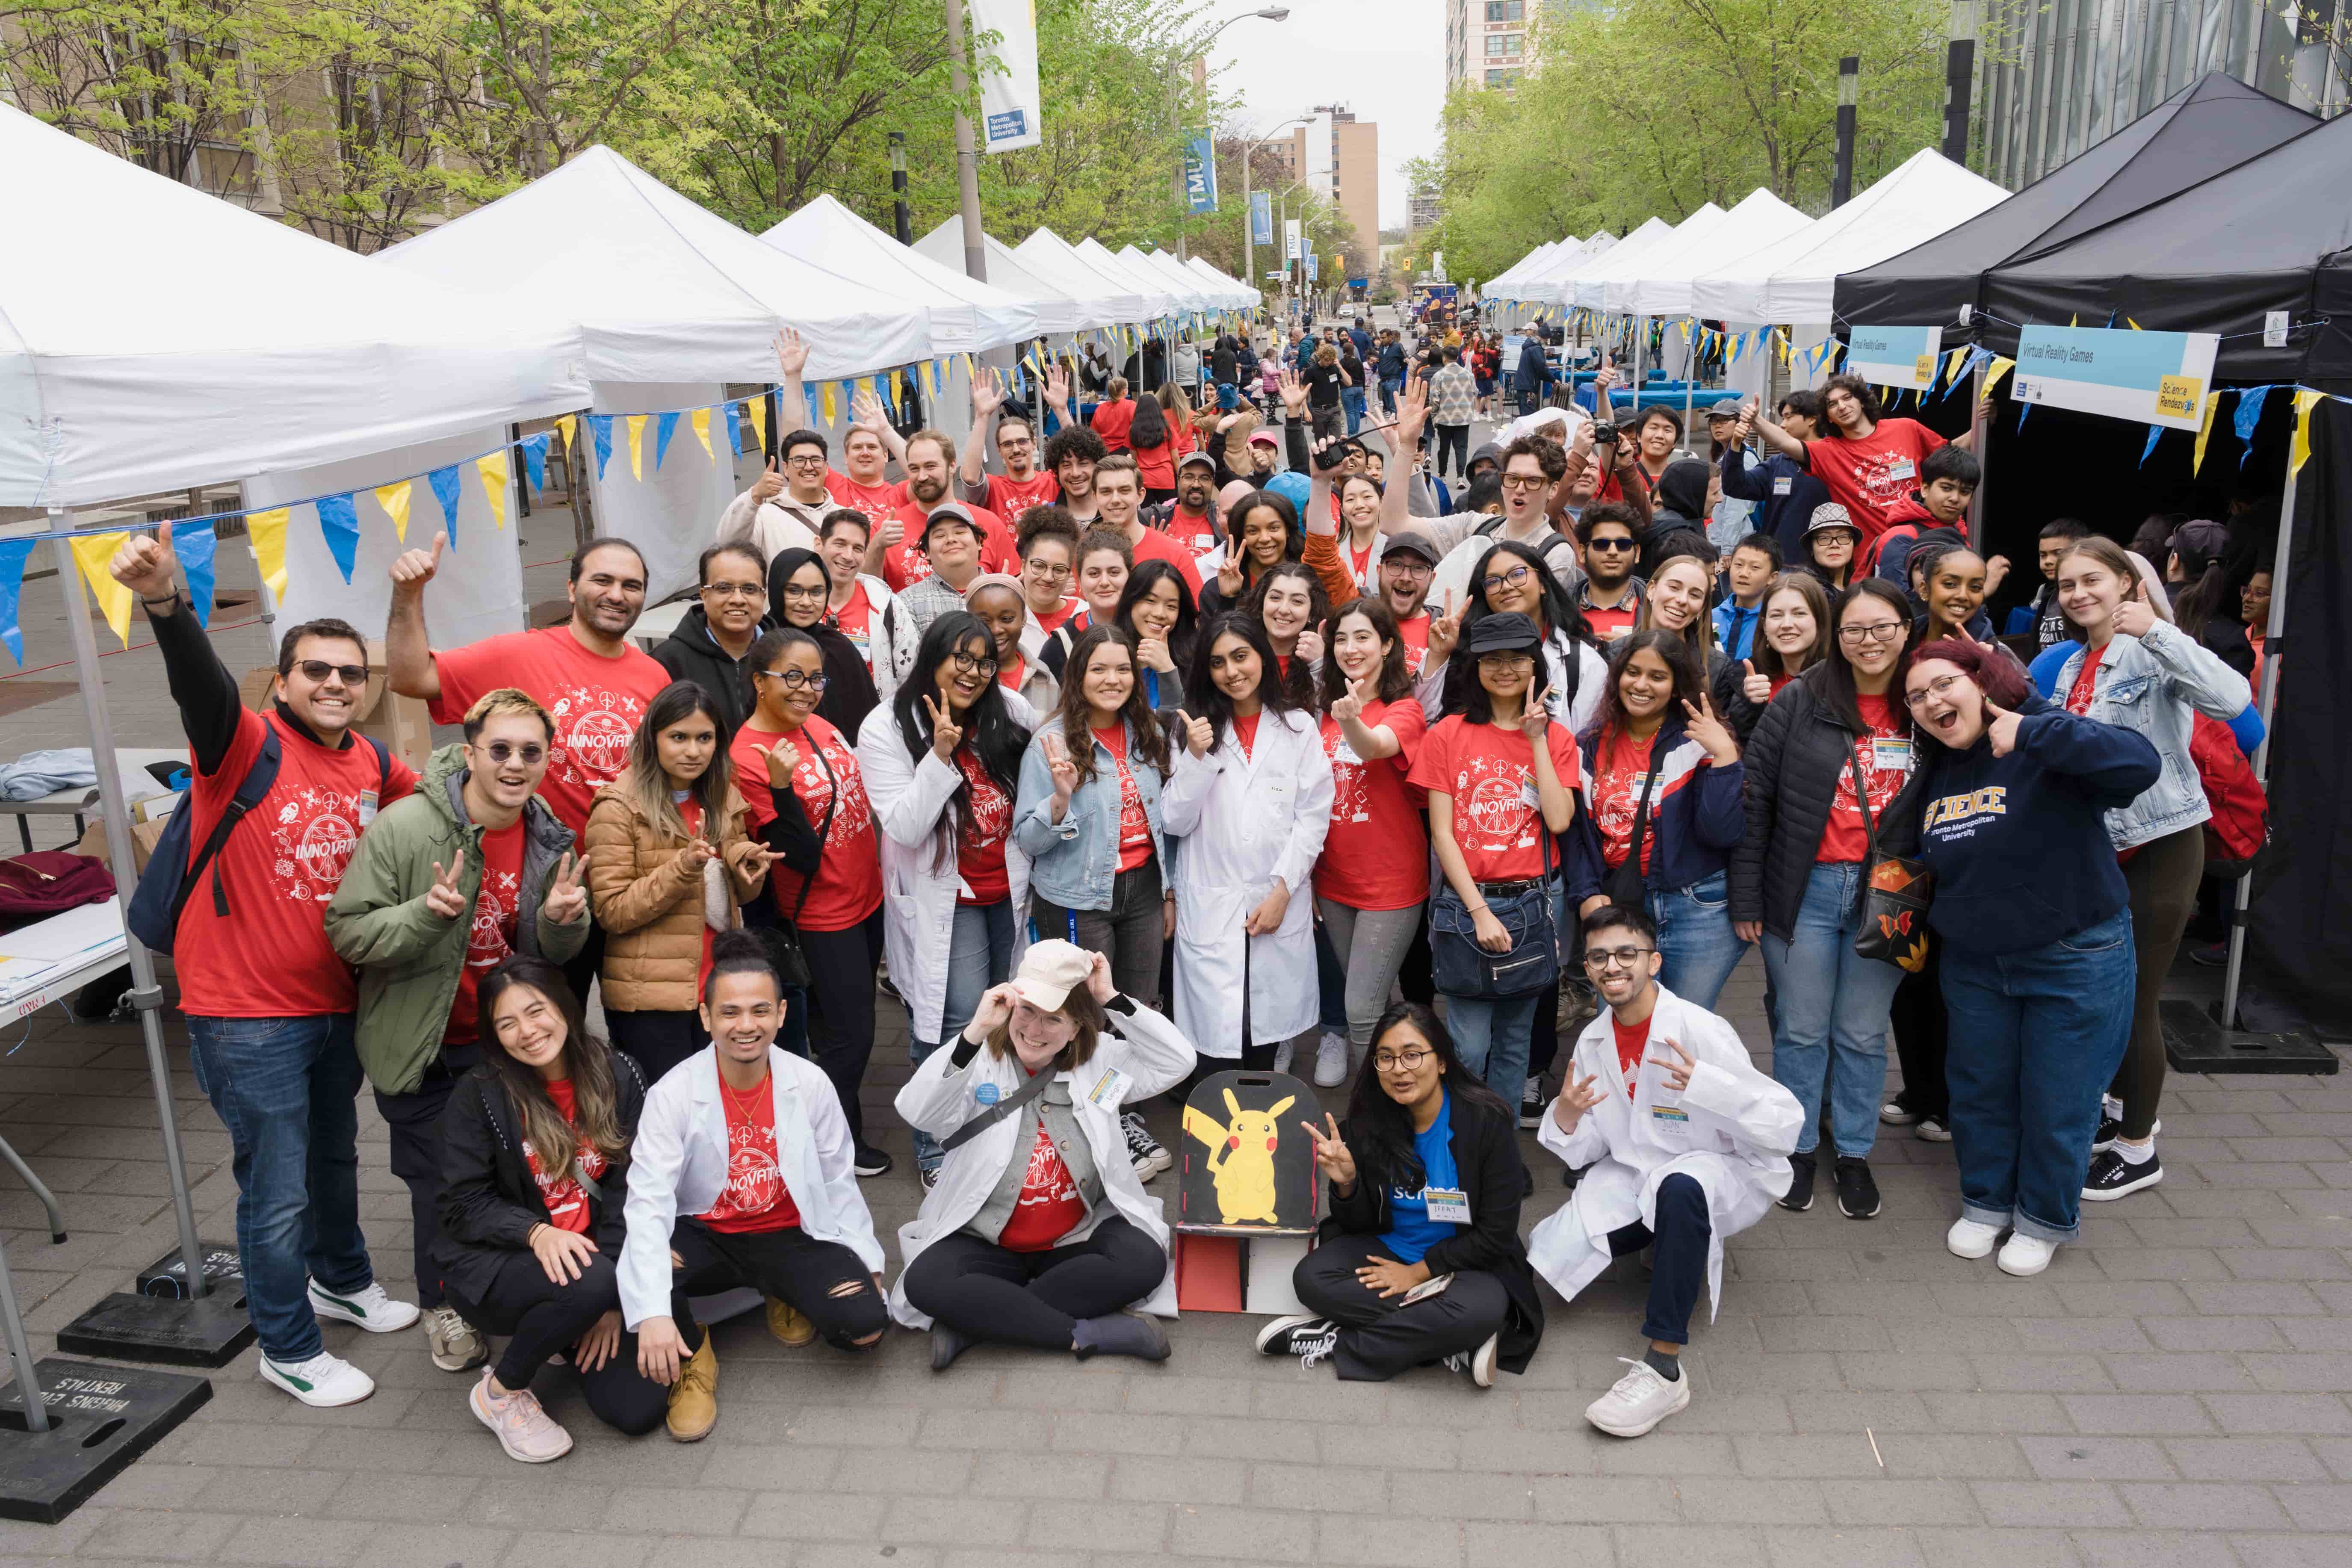 Group of about 50 people, wearing red t-shirts, posing for fun, with white event tents in the background